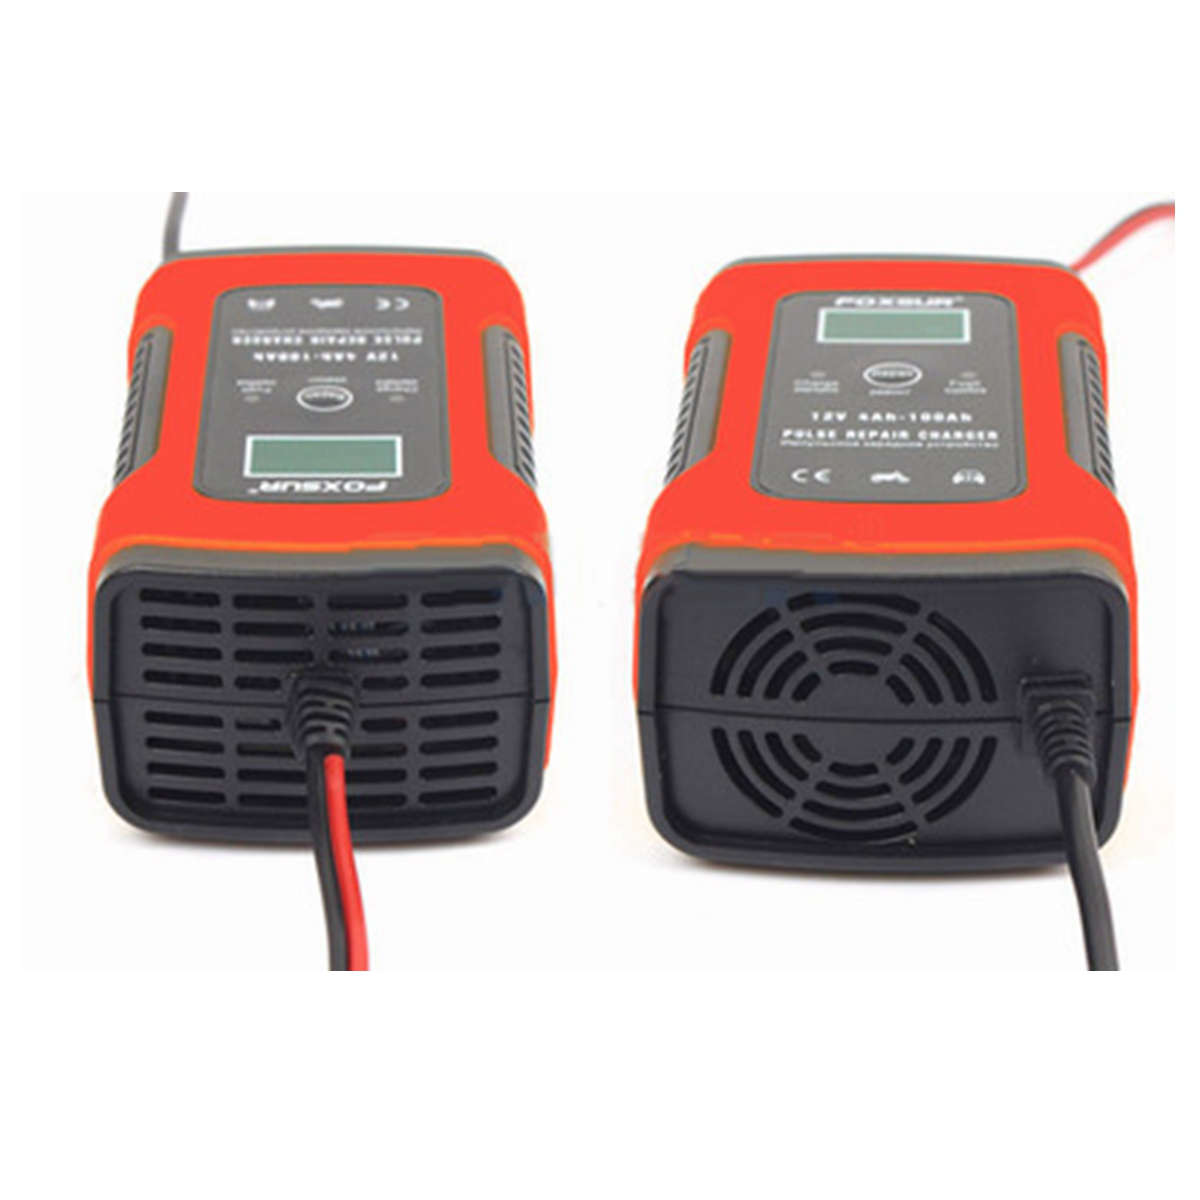 FOXSUR 12V 5A Pulse Repair LCD Battery Charger Red for Car Motorcycle Agm Gel Wet Lead Acid Battery